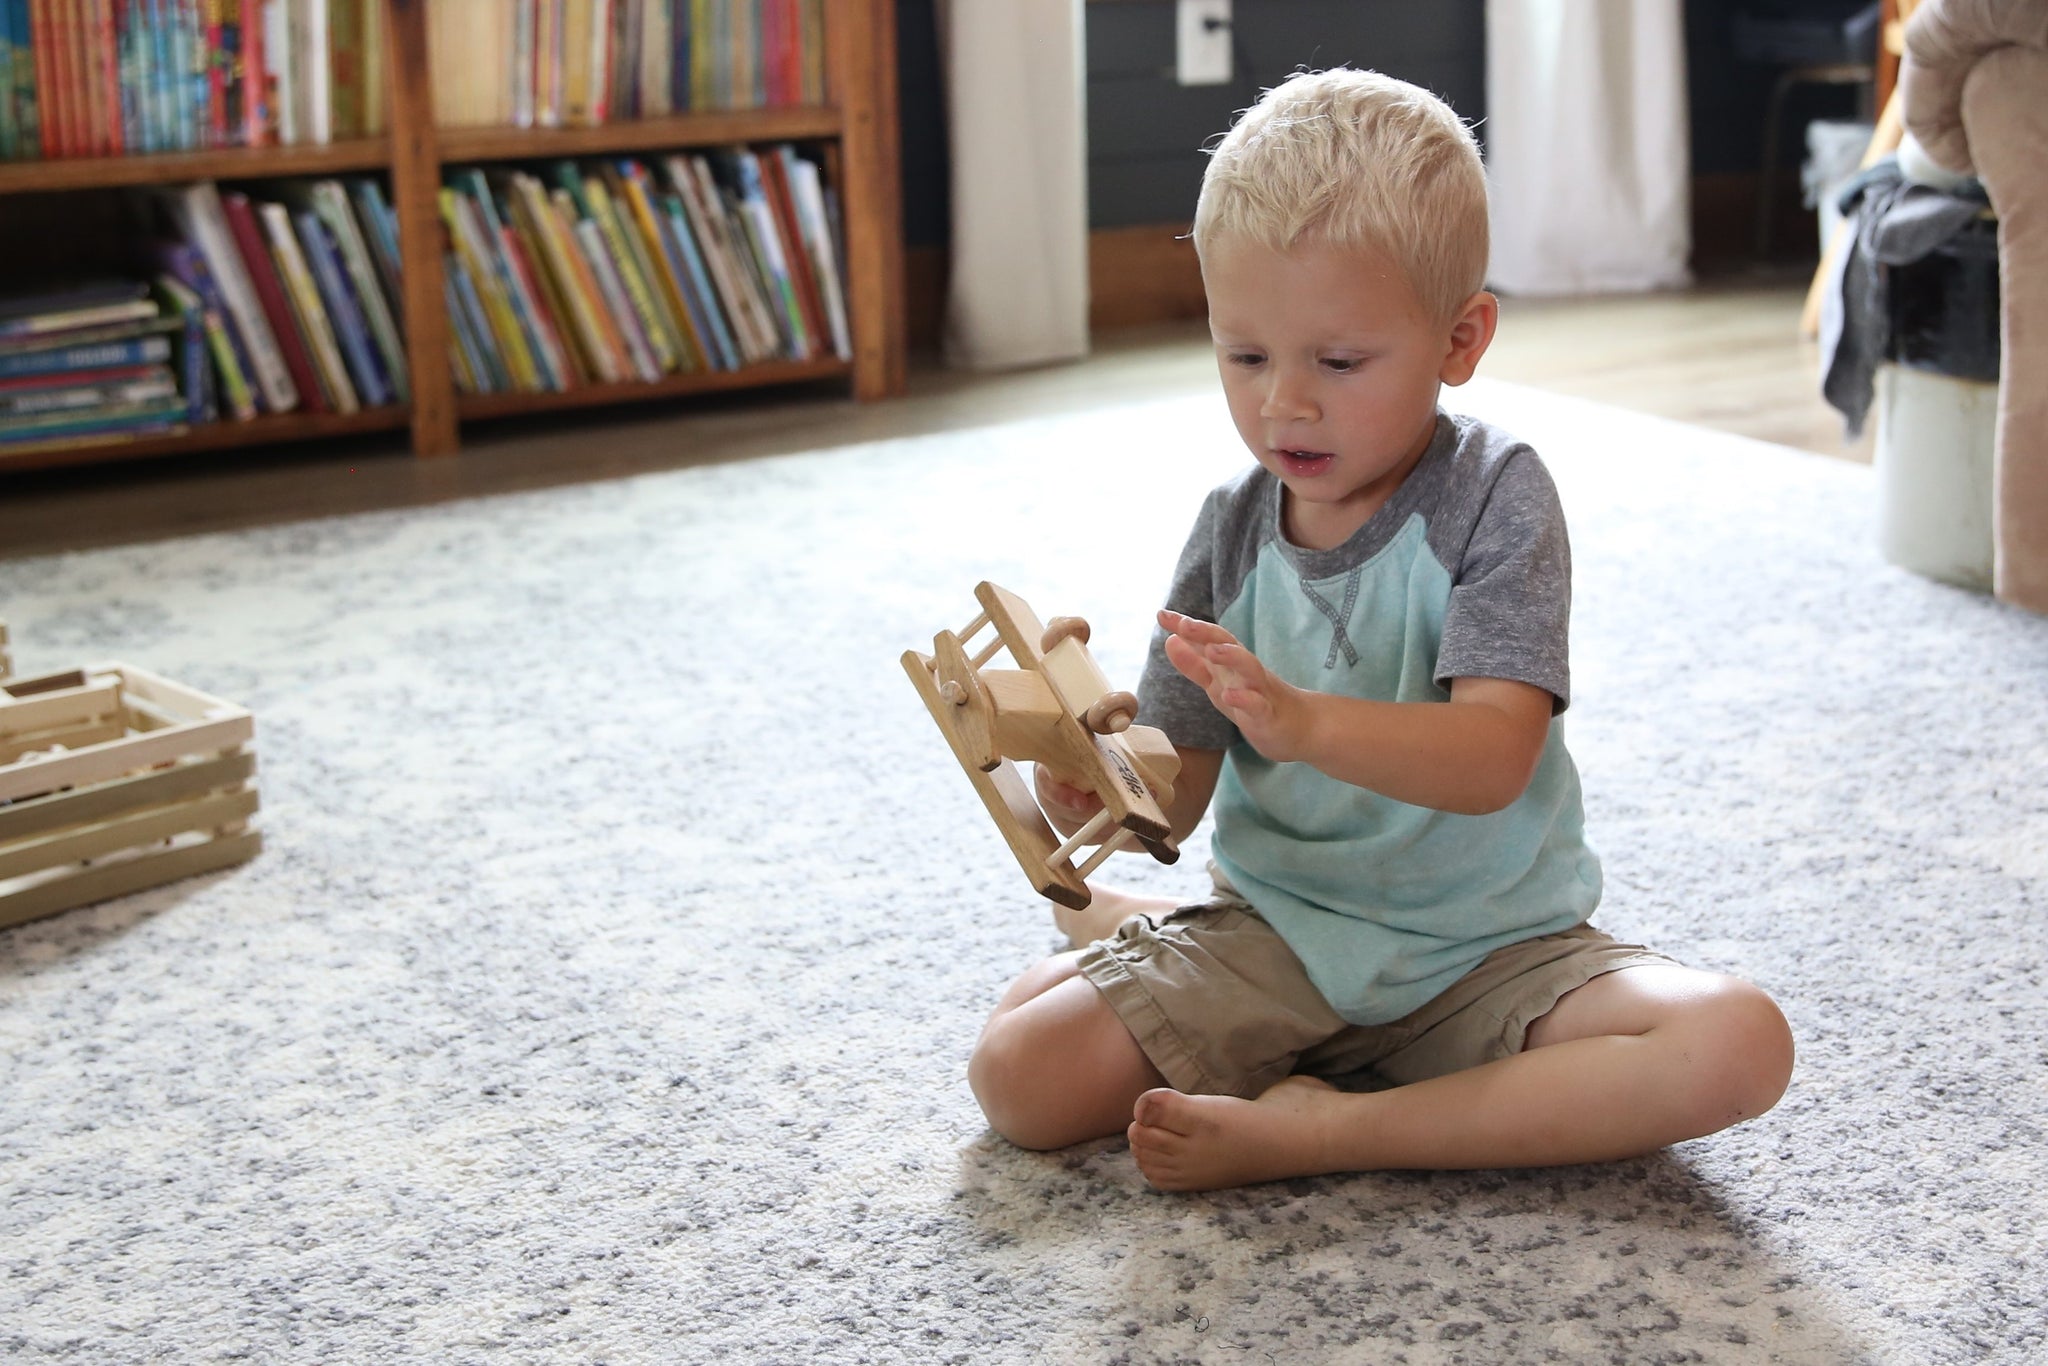 Amish-Made Wooden Airplane Toy –